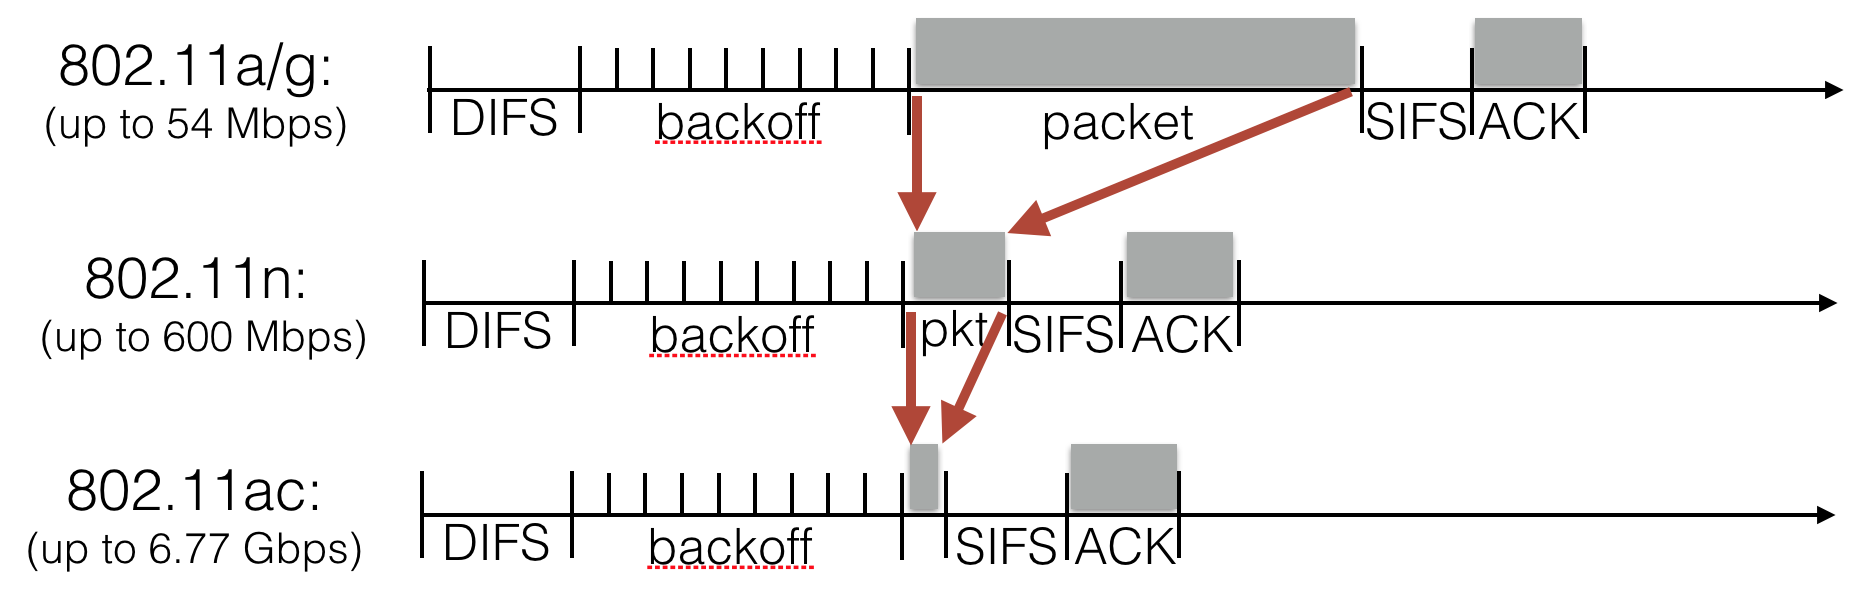 The fraction of time spent for transmitting packet decreases as transmission speeds increase